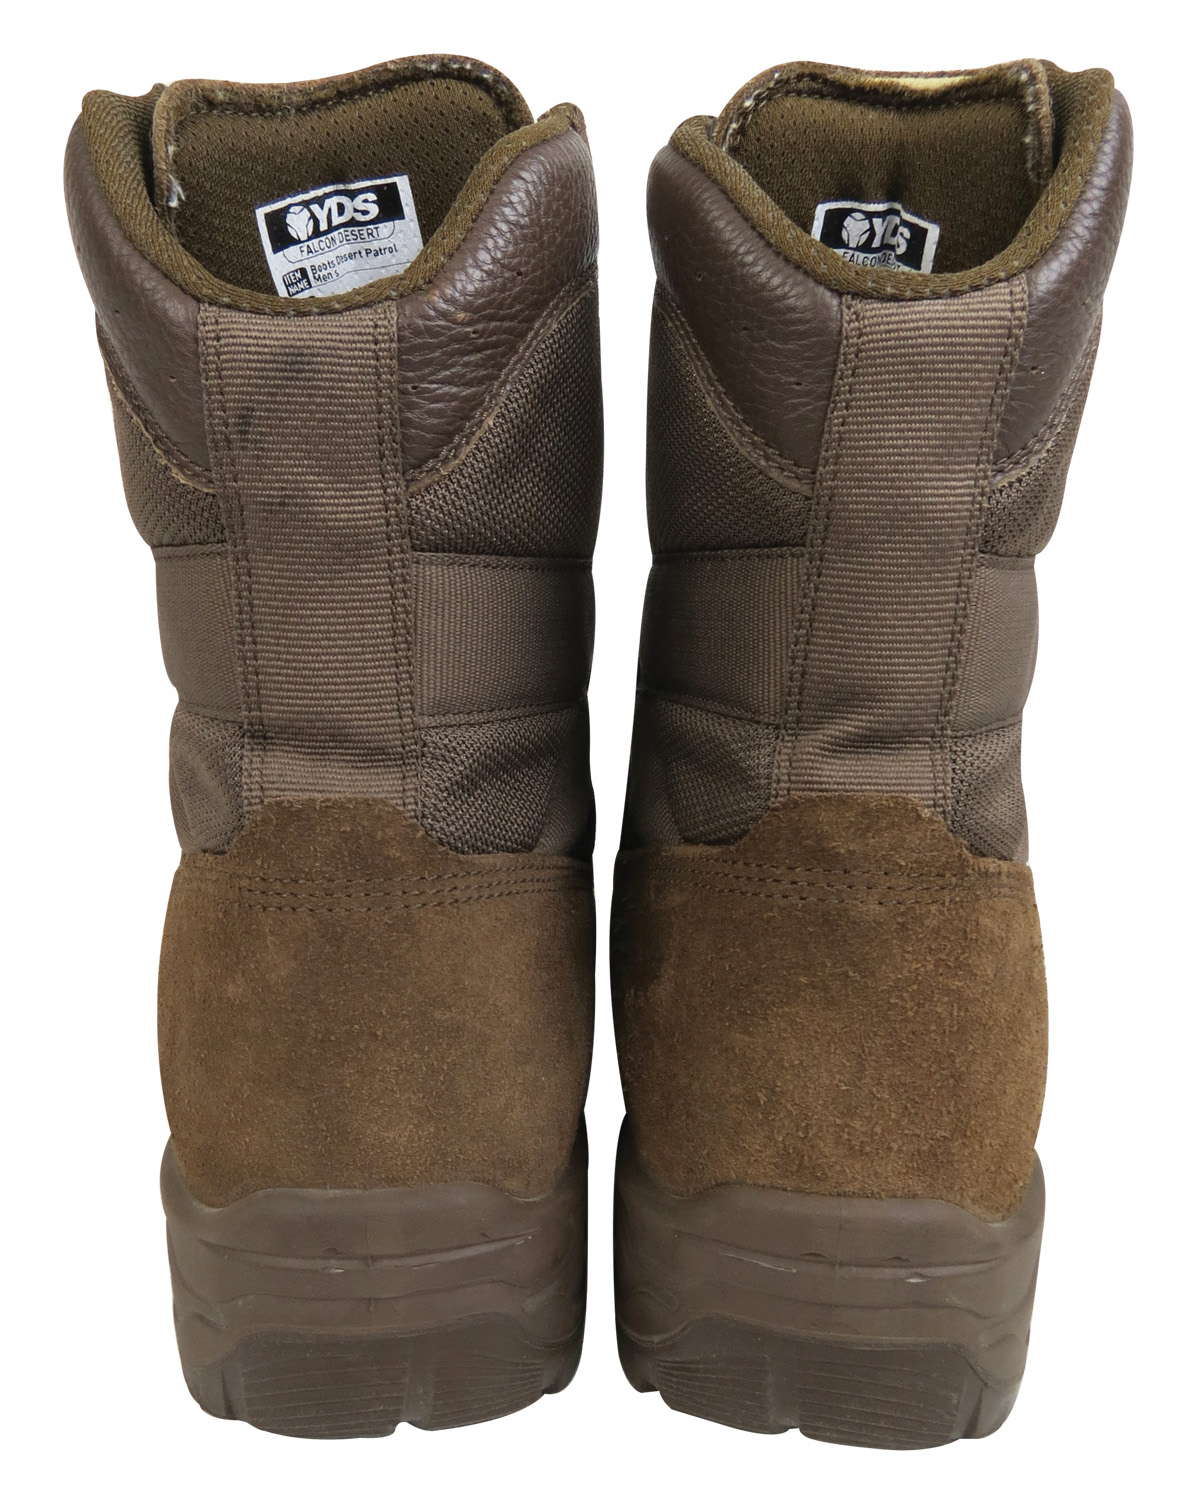 Ex-Army Brown Patrol Boots - YDS Desert Falcon